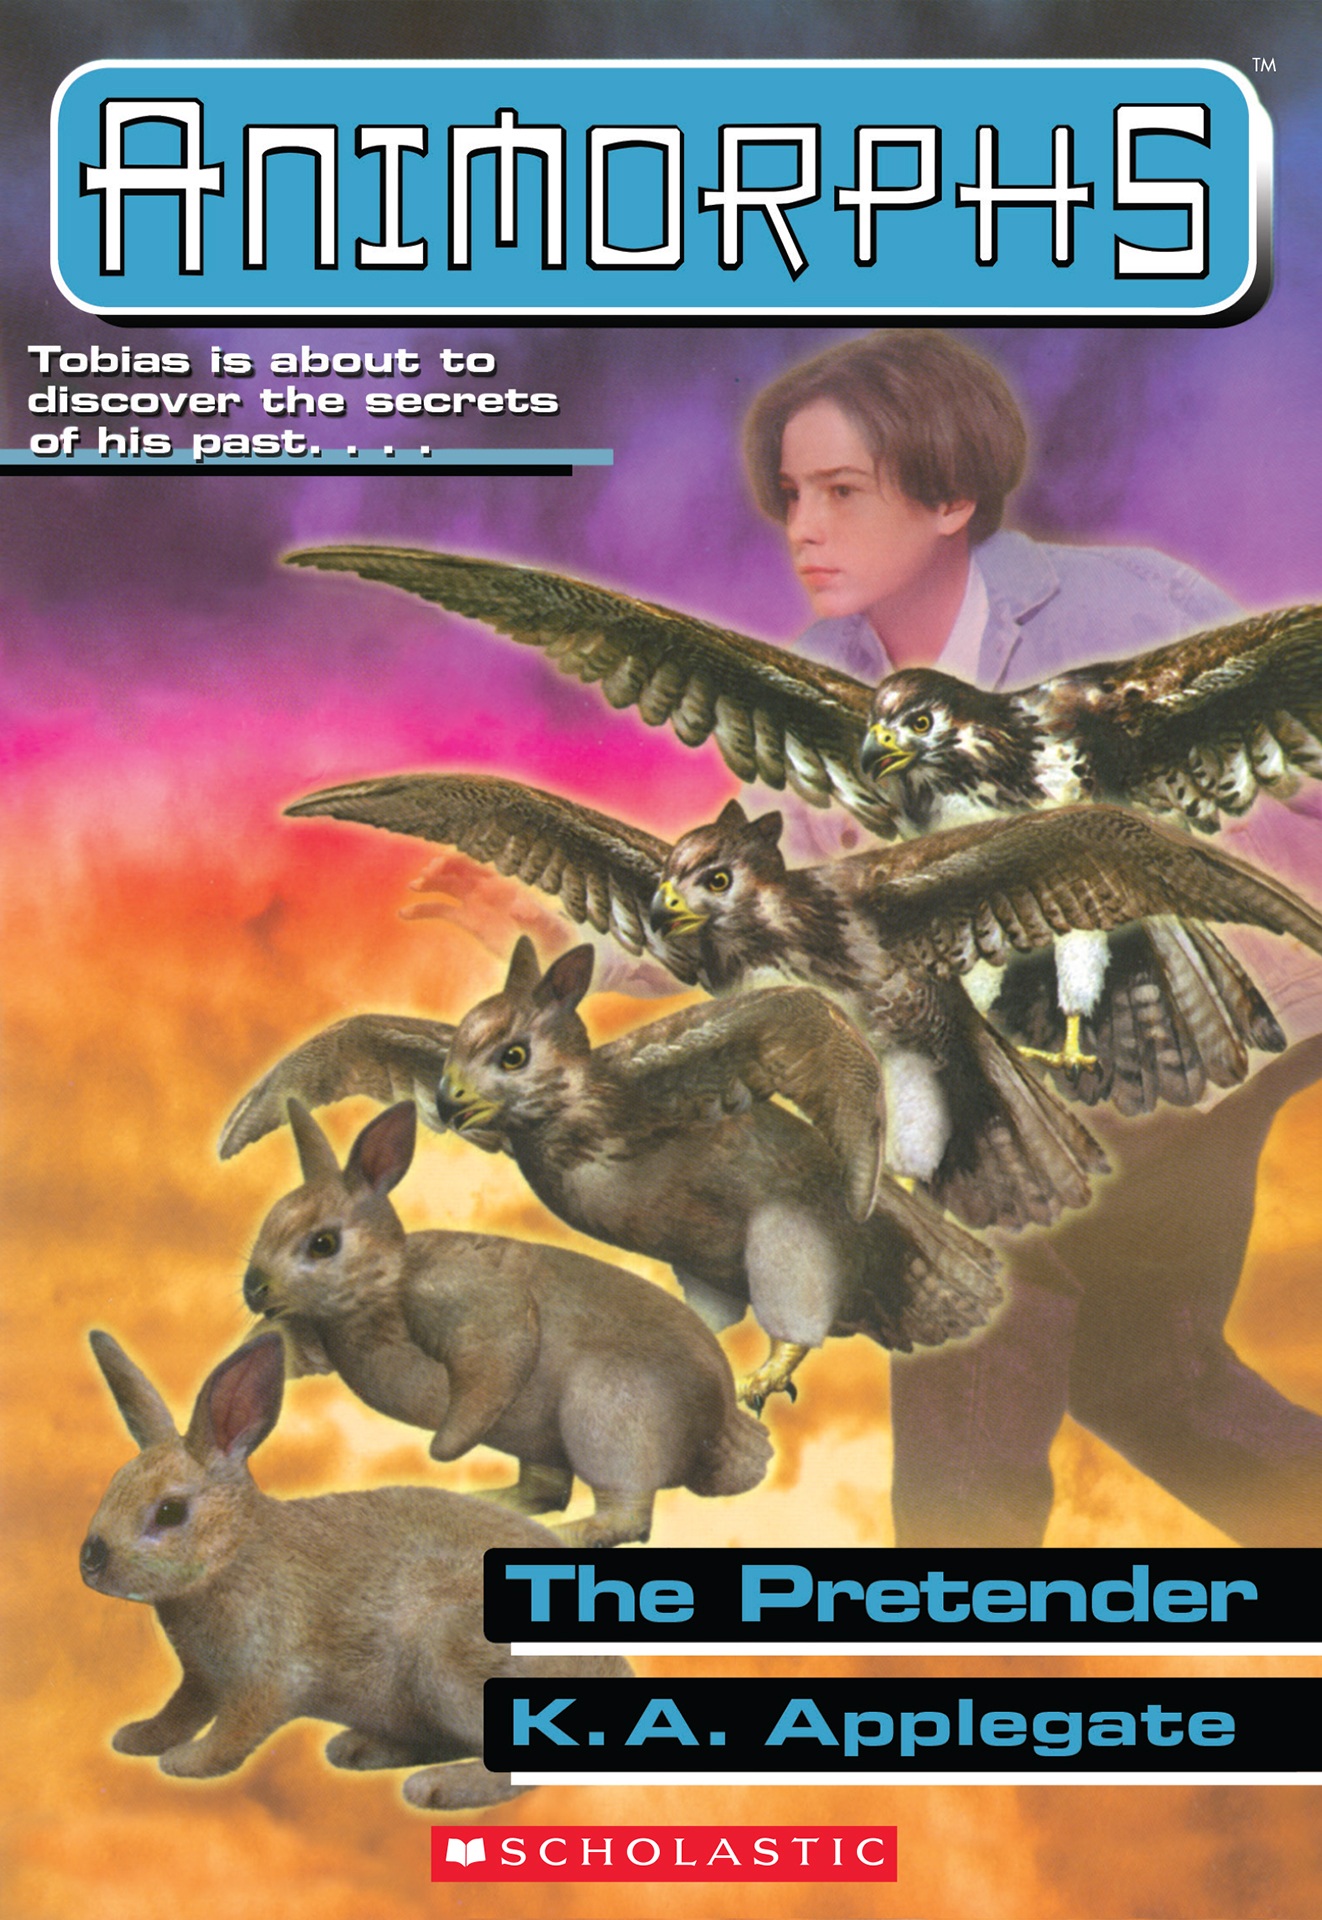 62 Top Best Writers Animorphs Book 1 Pdf from Famous authors